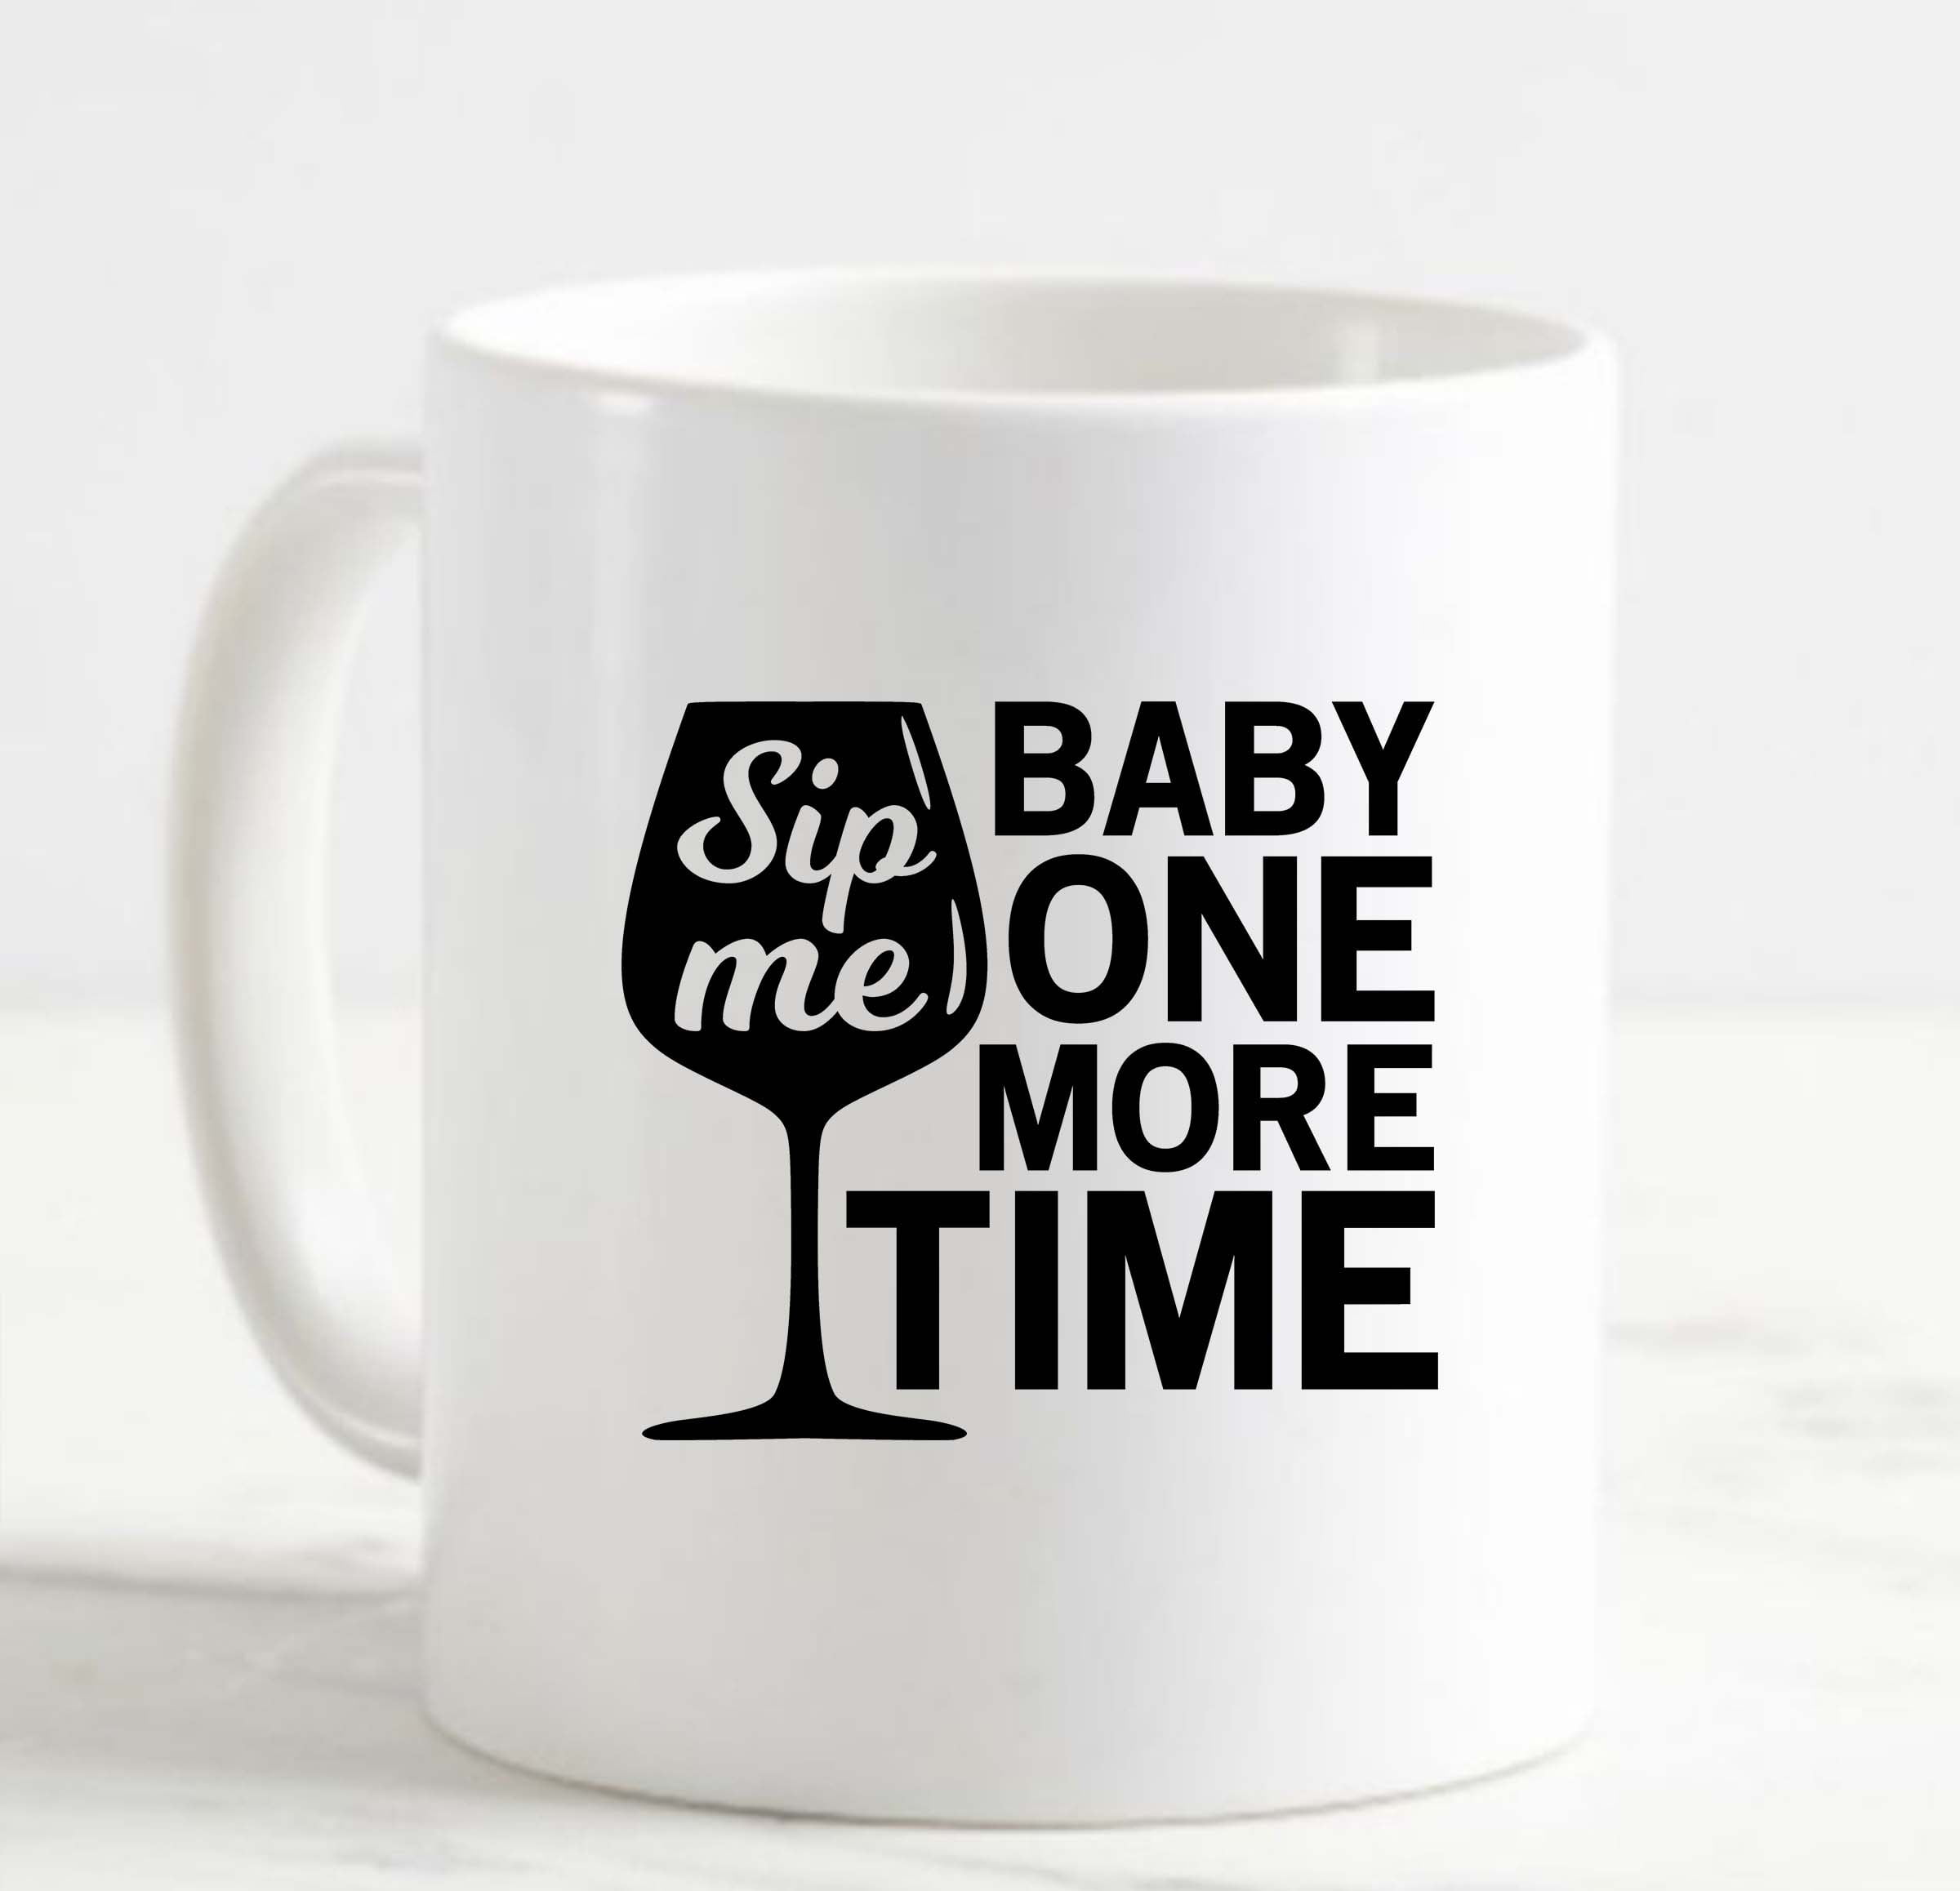 Coffee Mug Sip Me Baby One More Time Funny Song Parody Wine Glass Drinking  White Coffee Mug Funny Gift Cup 